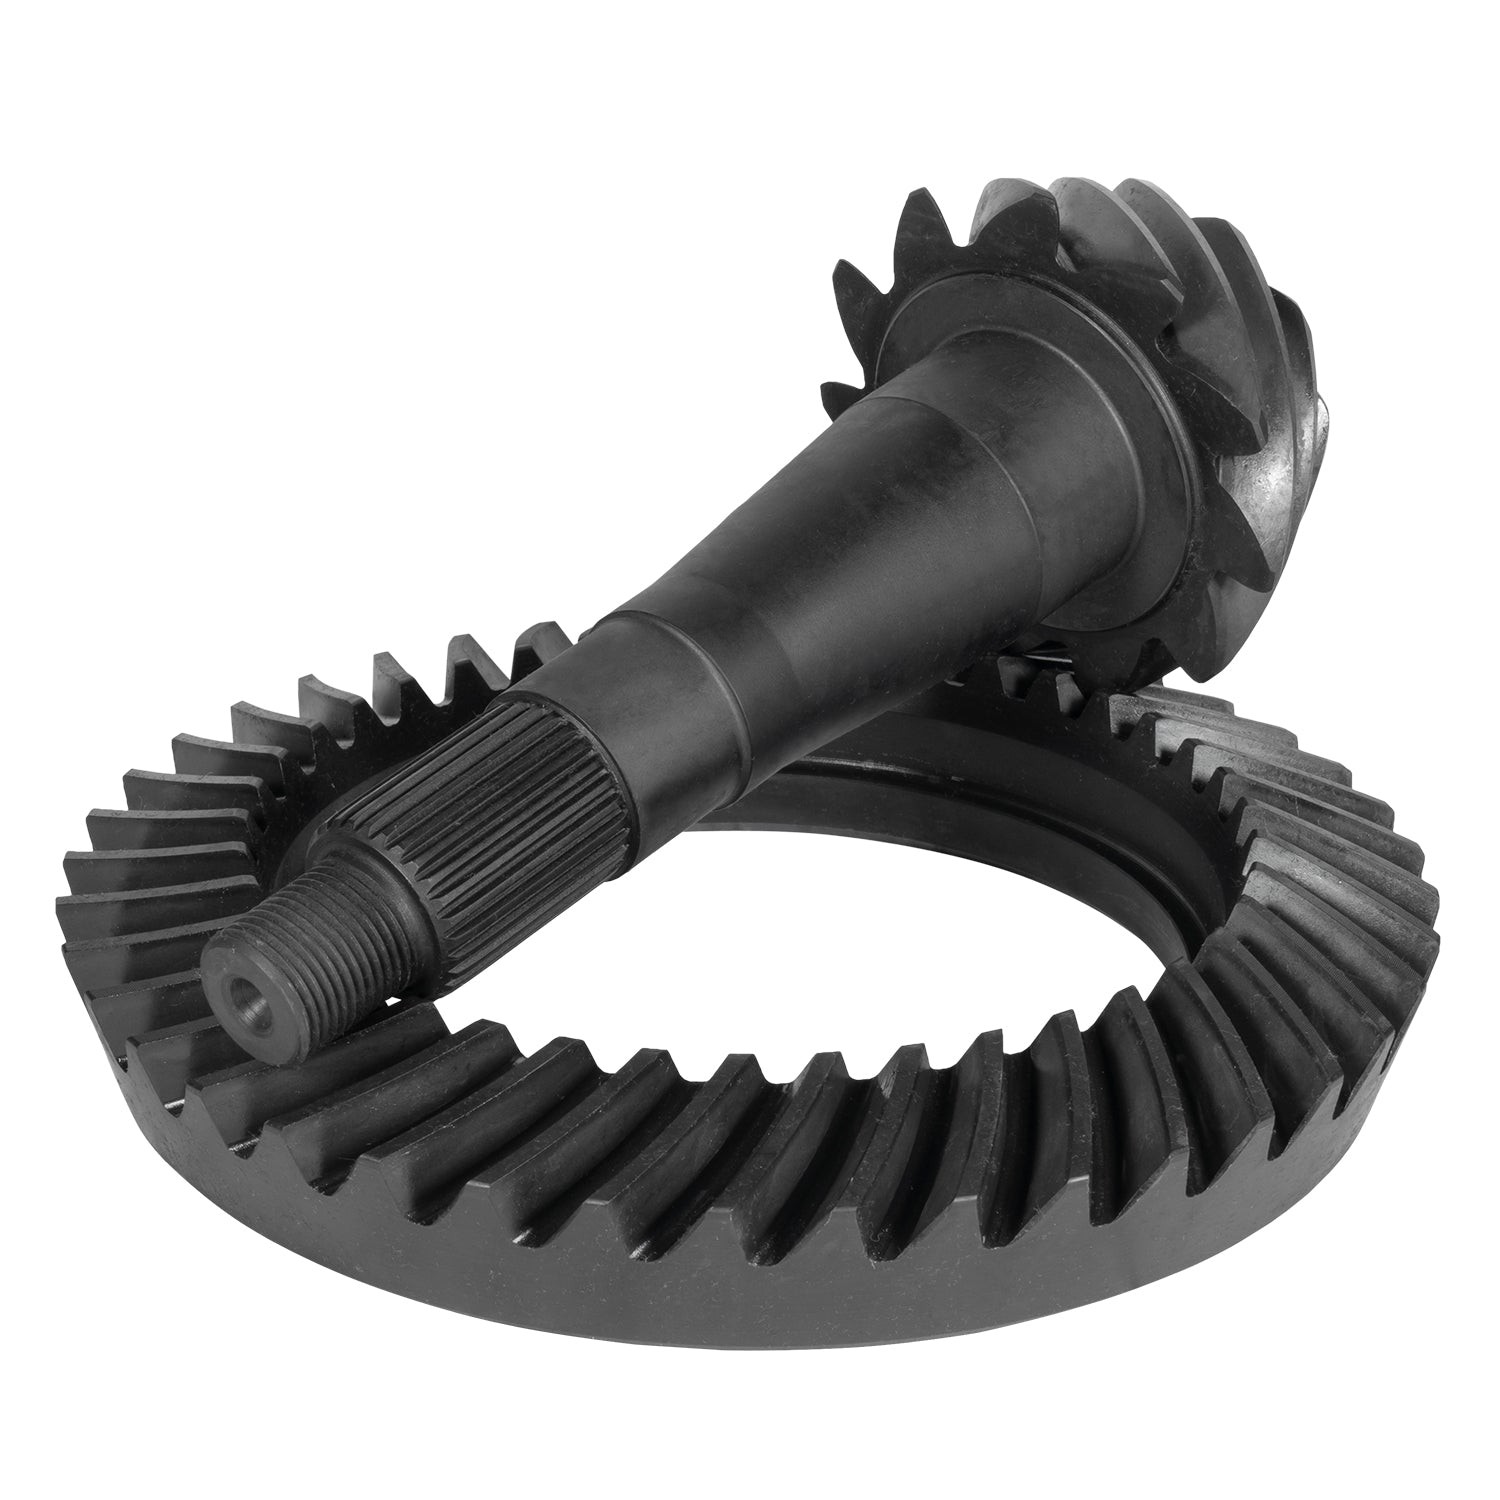 Yukon Gear Chrysler Dodge Plymouth Differential Ring and Pinion Kit - Rear YGK2345